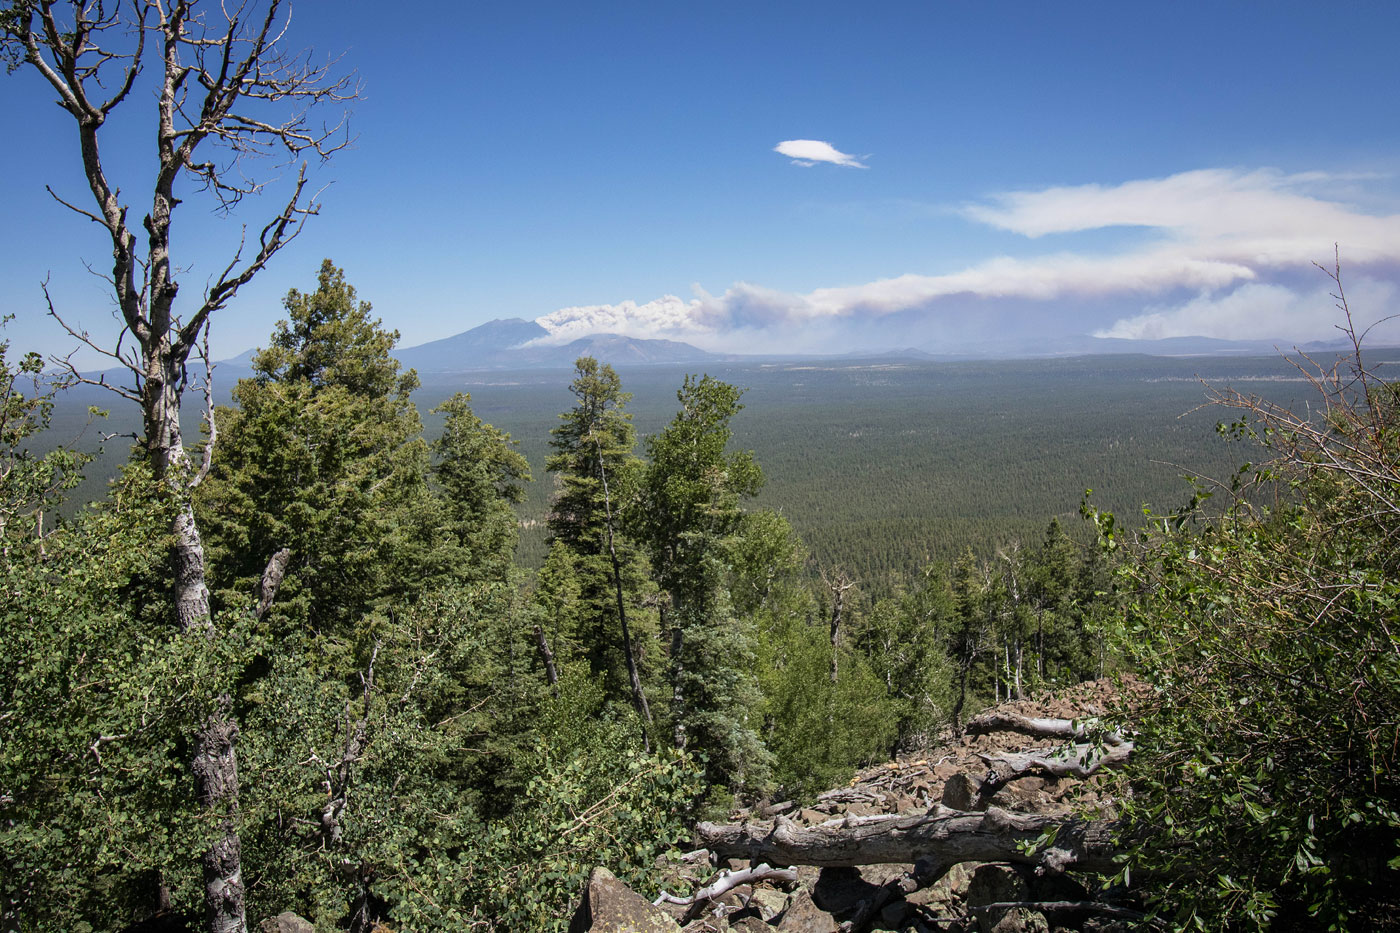 Hike Mormon Mountain Trail in Coconino National Forest, Arizona - Stav is Lost